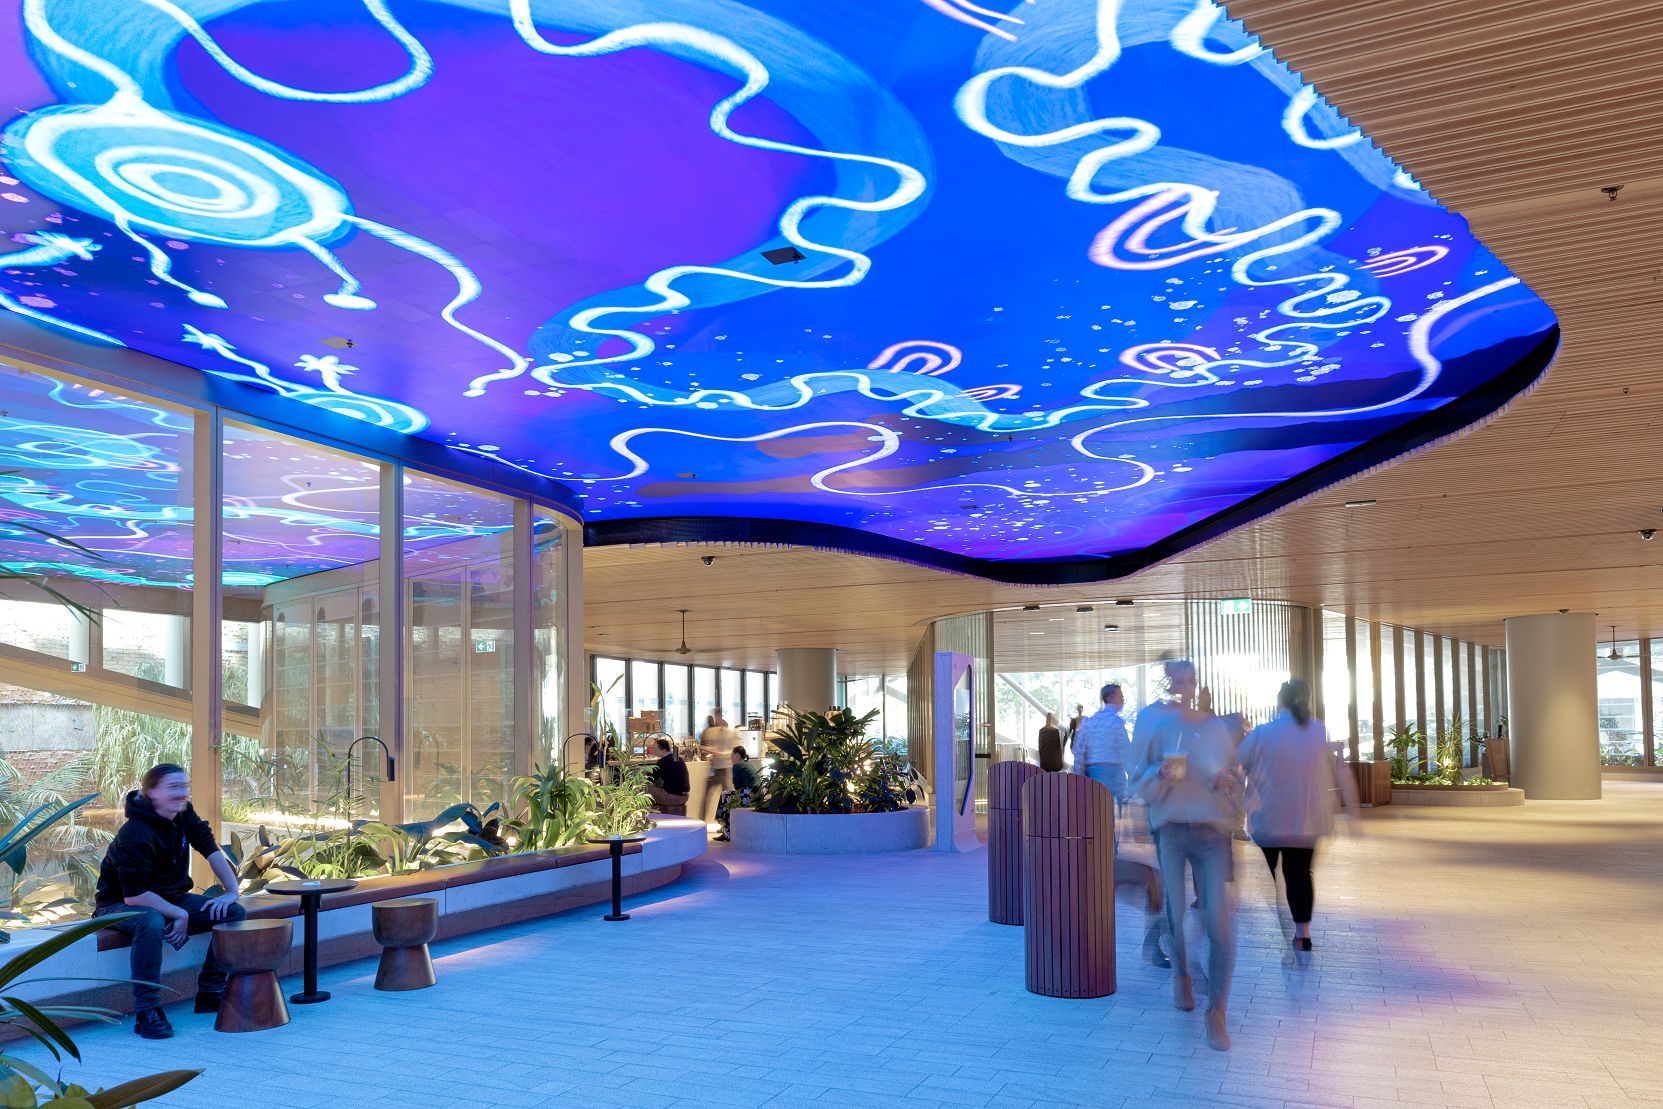 Photo of Mirvac Heritage Lanes commercial lobby foyer in Brisbane Australia showing digital placemaking art screen with vibrant blue indigenous Australian aboriginal artwork created by artist Rachael Sarra in partnership with VANDAL.